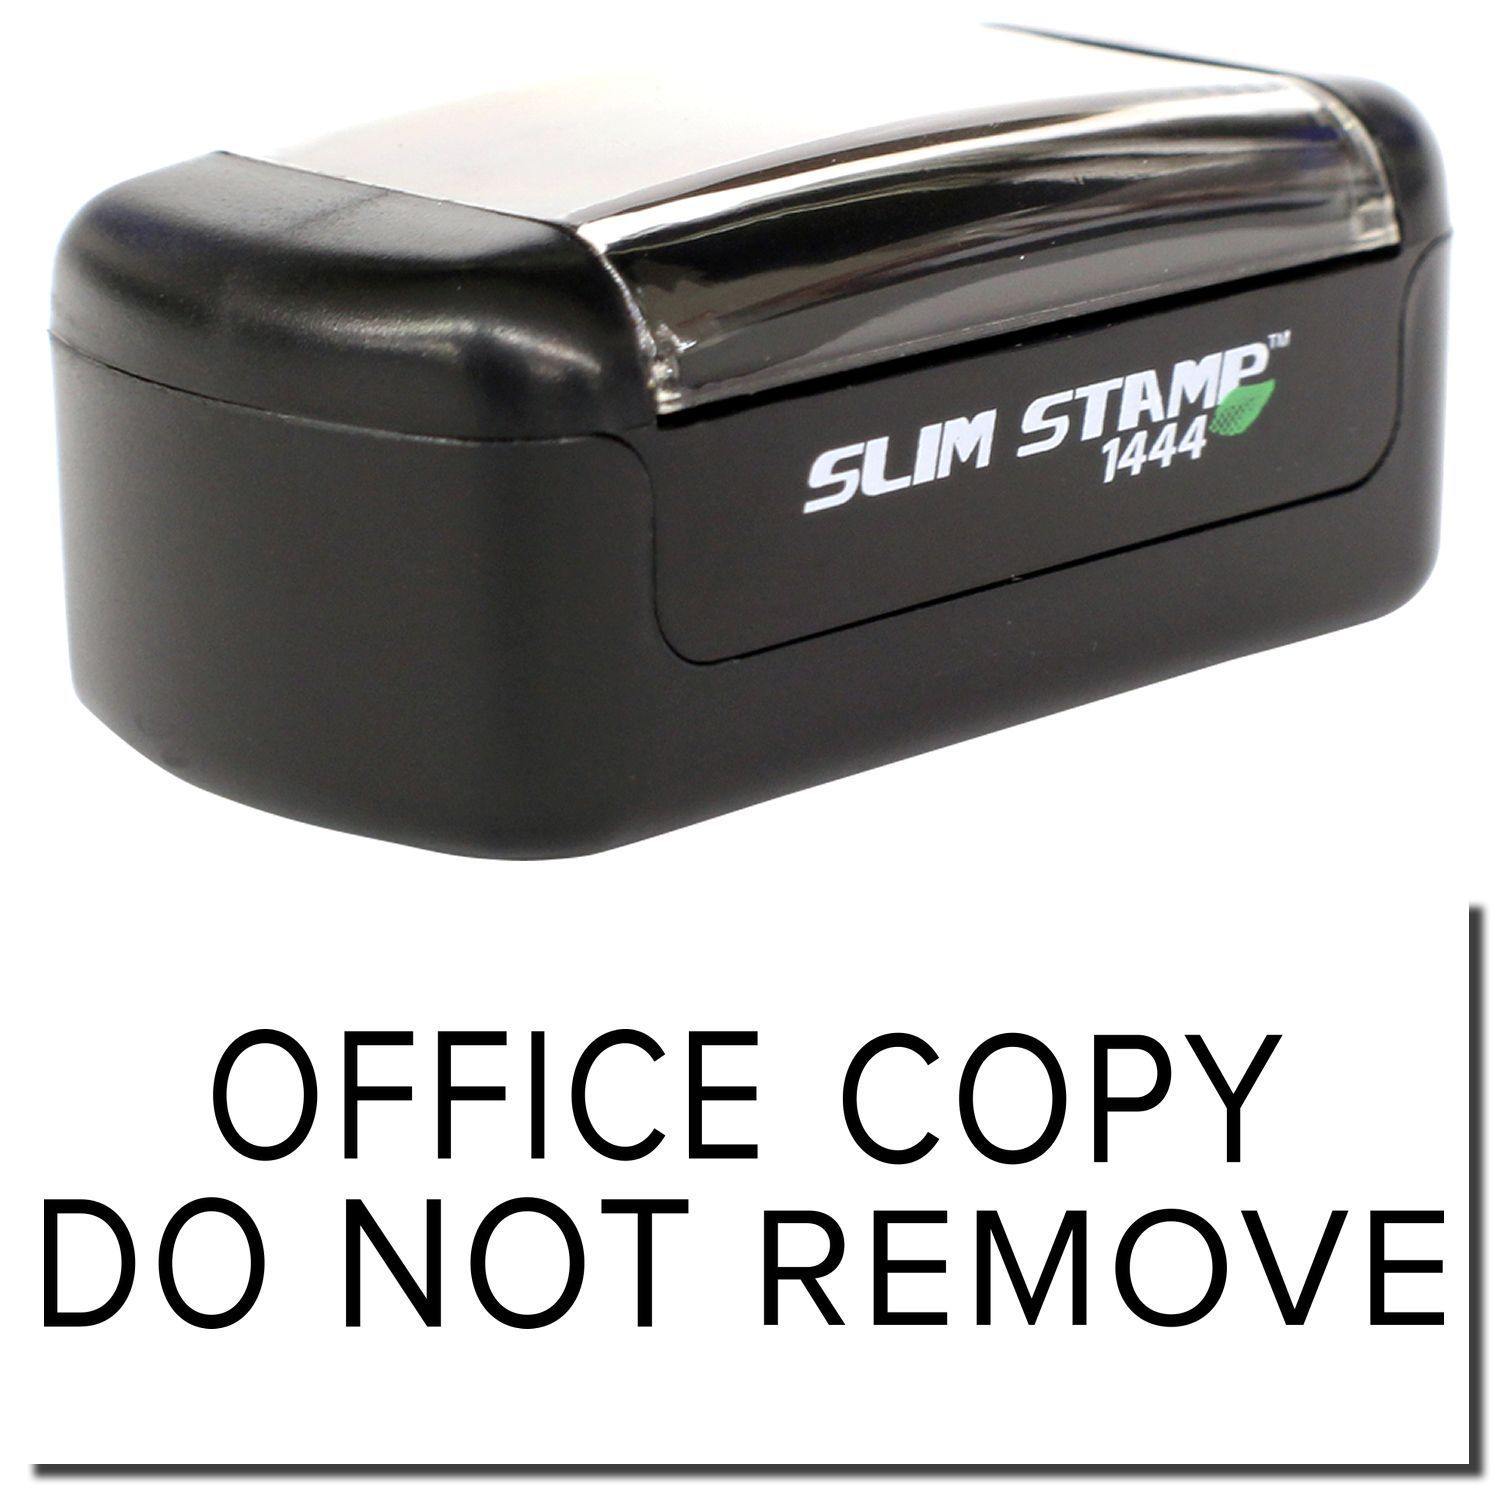 A stock office pre-inked stamp with a stamped image showing how the text "OFFICE COPY DO NOT REMOVE" in a narrow font is displayed after stamping.